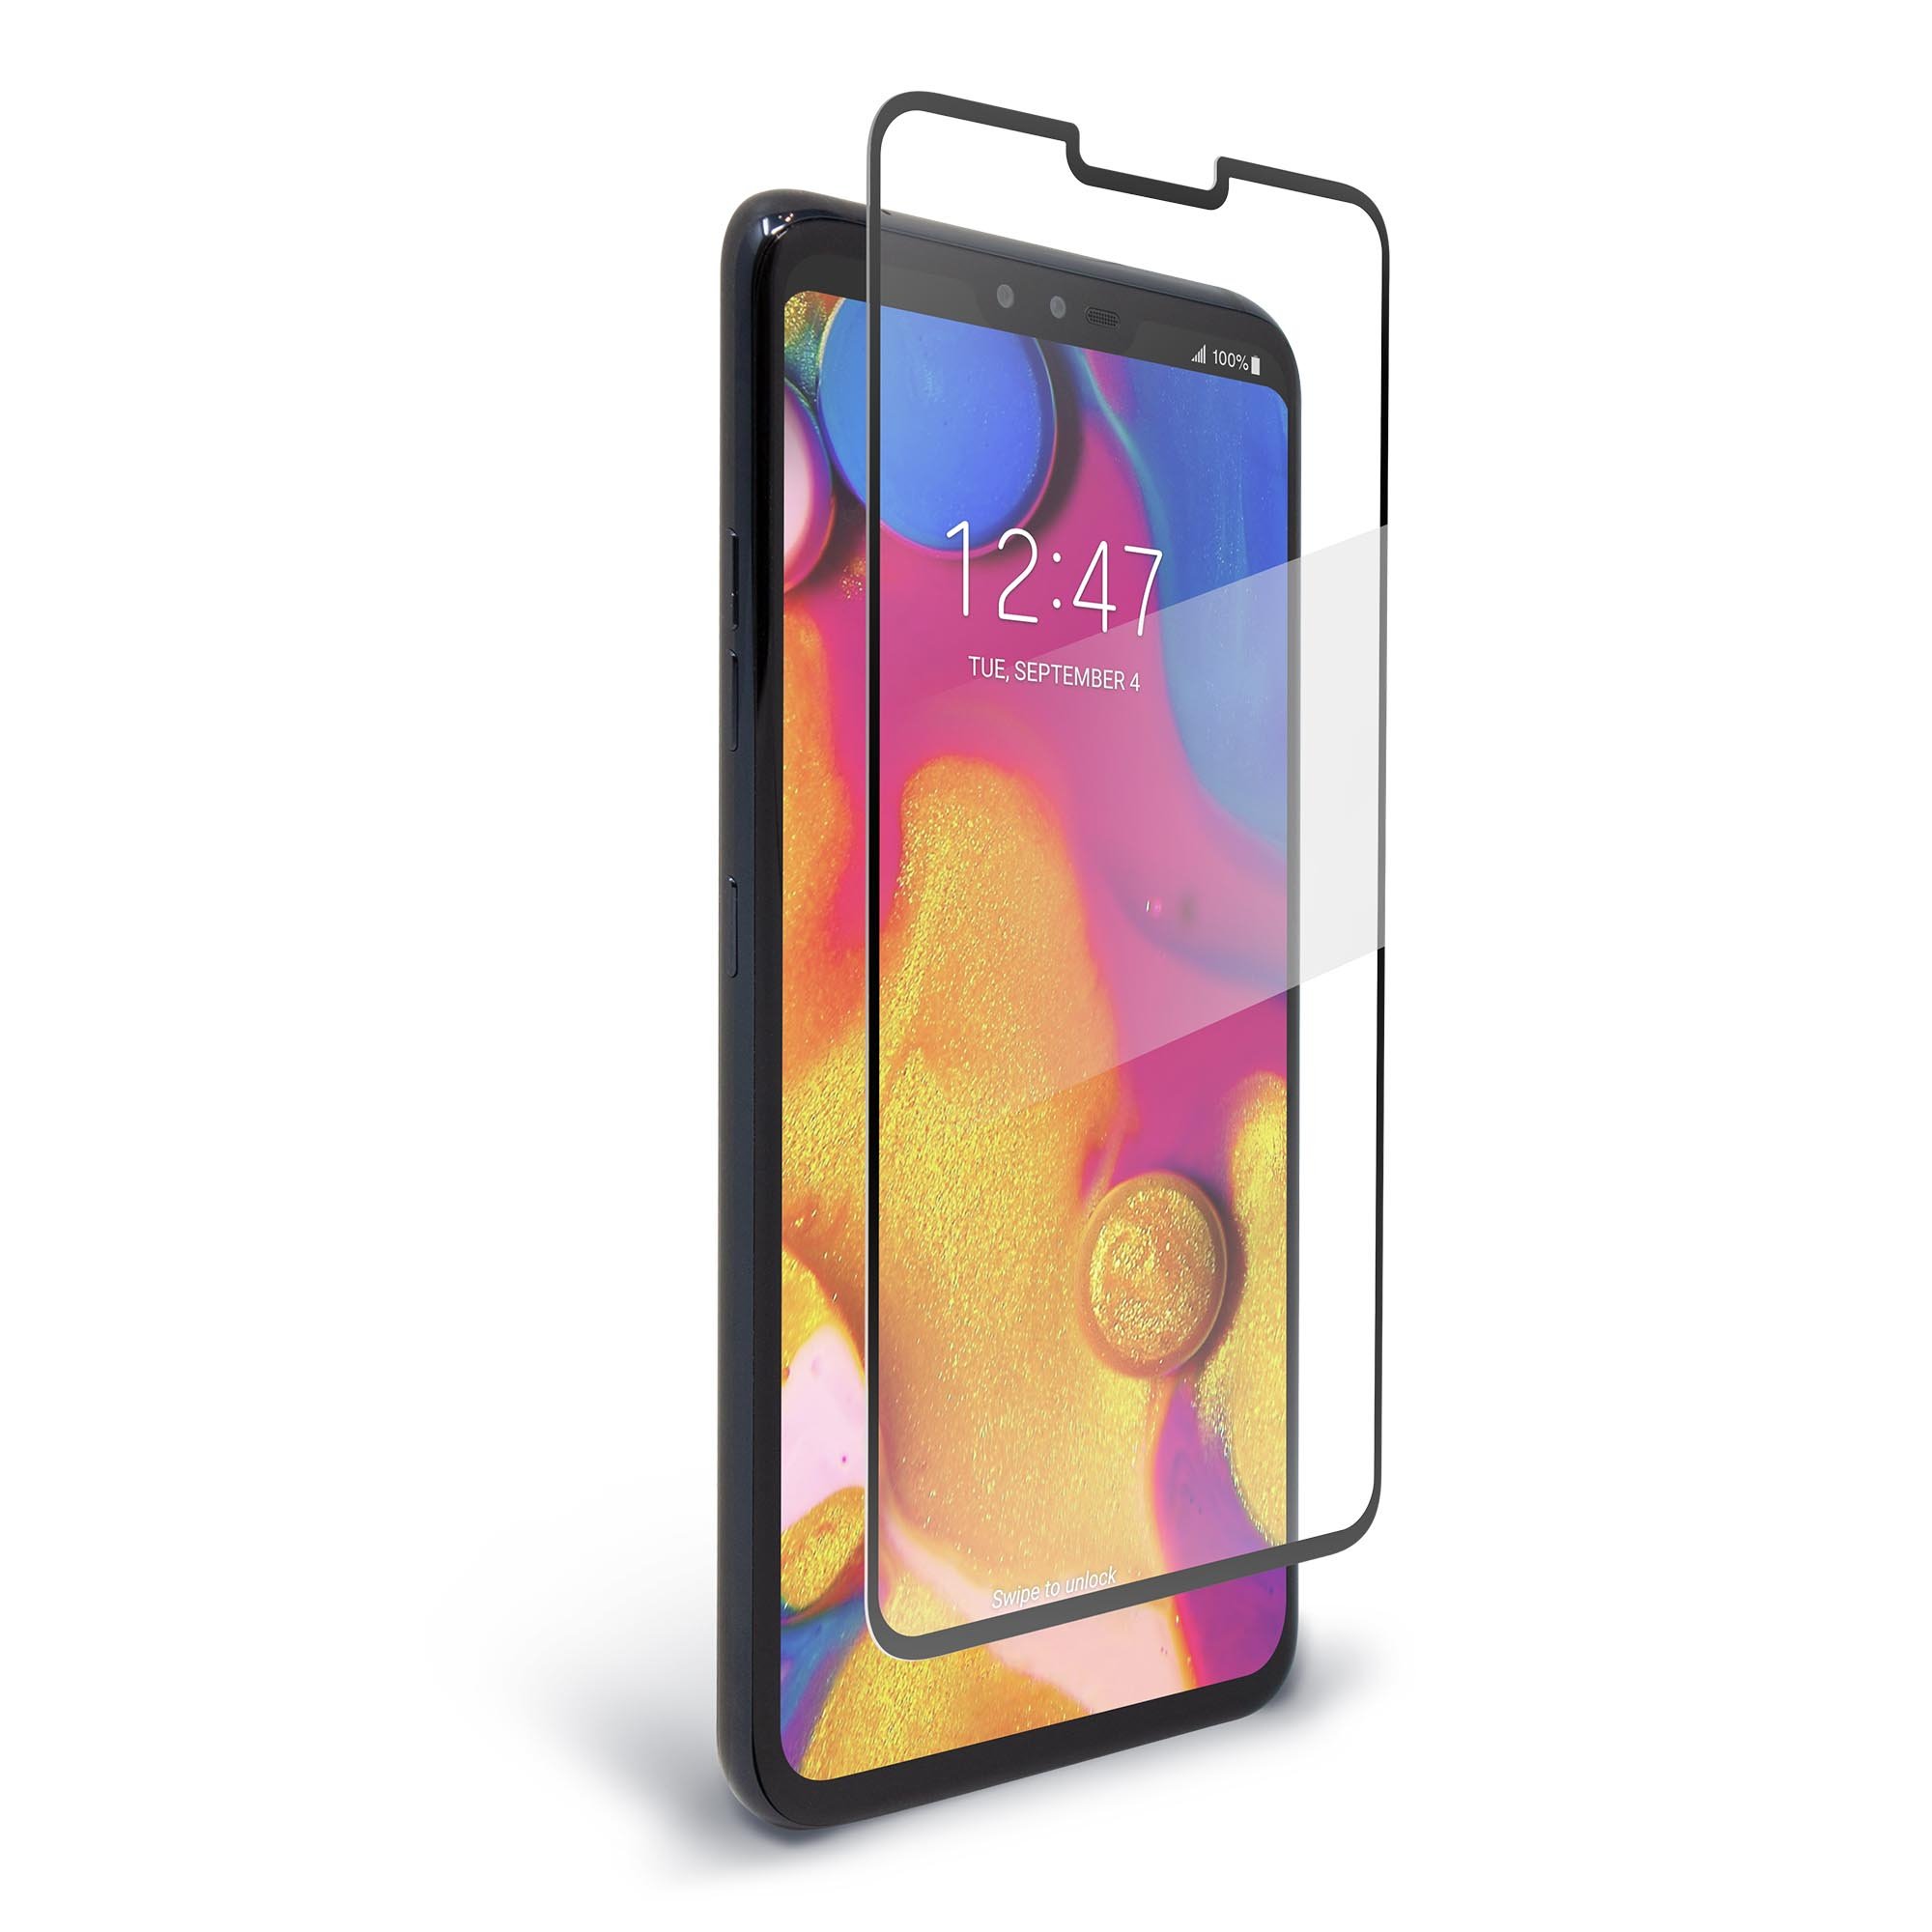 V40 ThinQ LG V40 ThinQ Cases, Clear Screen Protectors, Covers & Skins